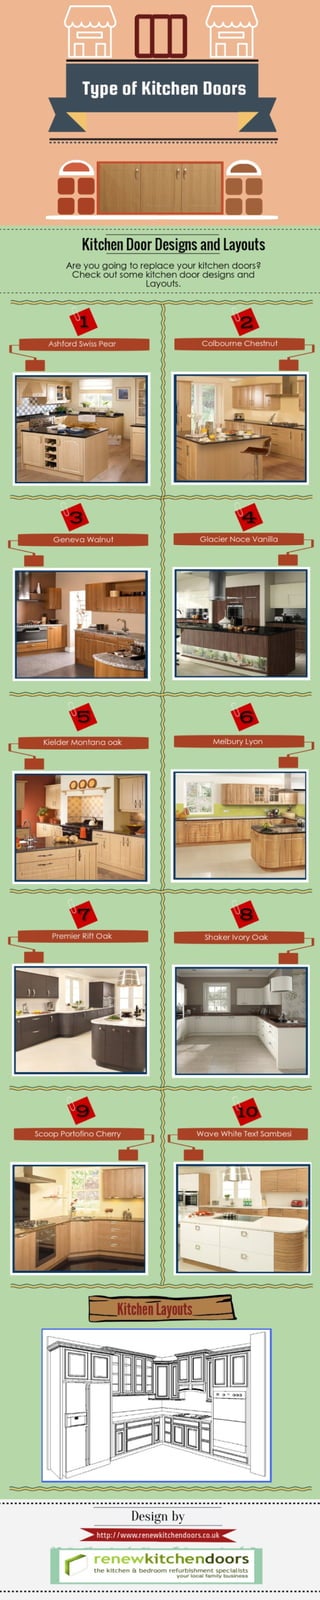 Type of Kitchen Doors Designs and Layouts